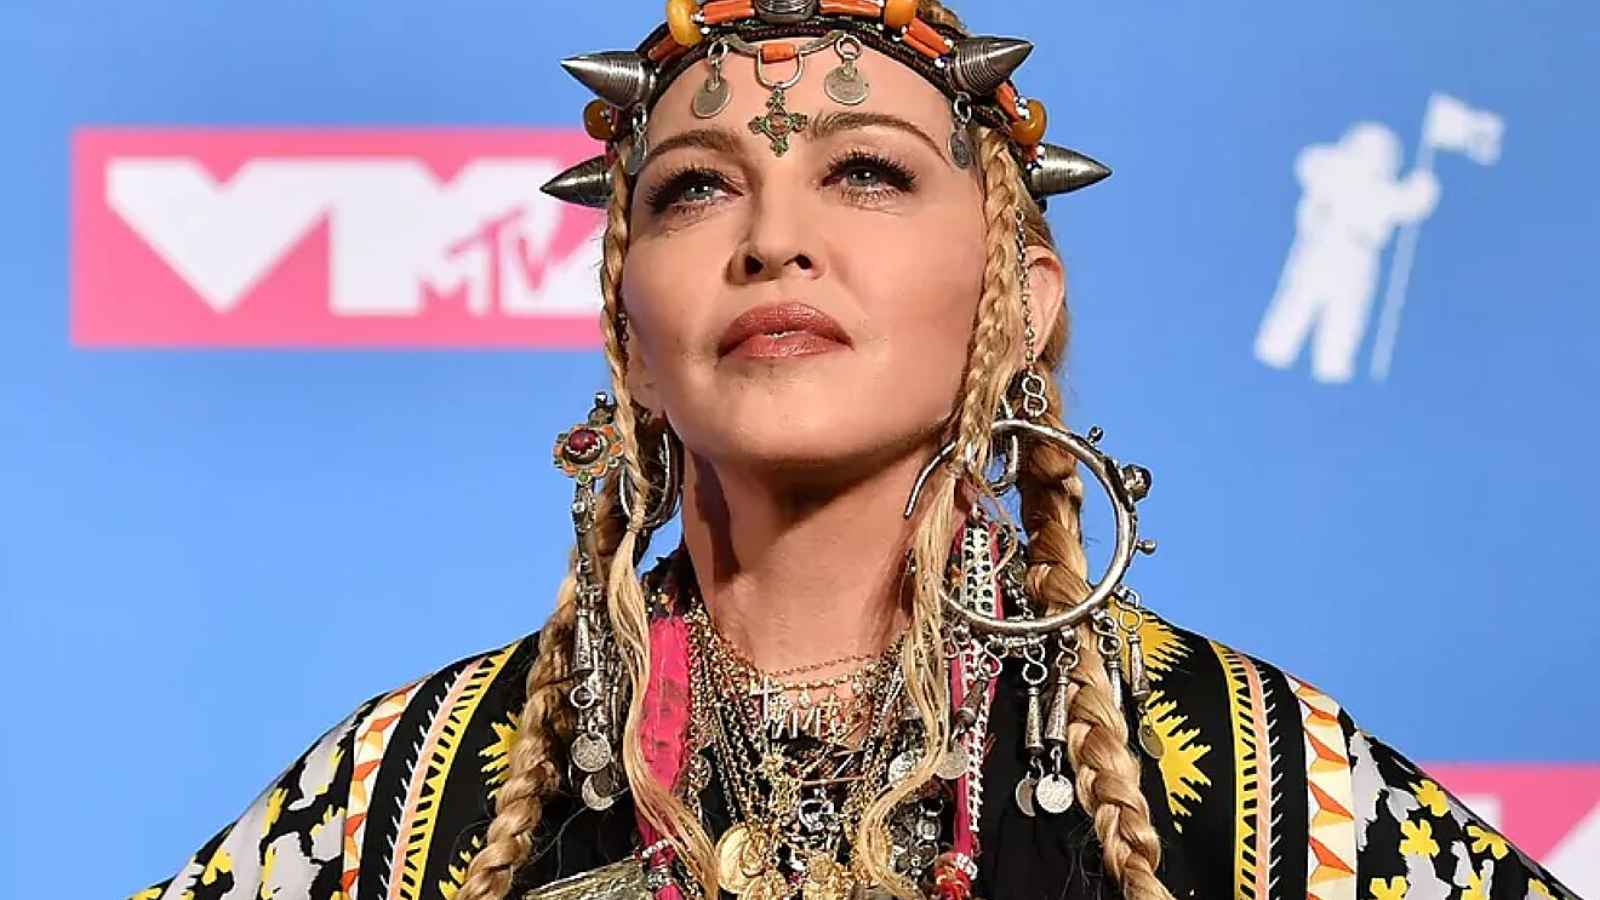 Madonna Biography: Age, Birthday, Early life, Career, Personal life, Net Worth